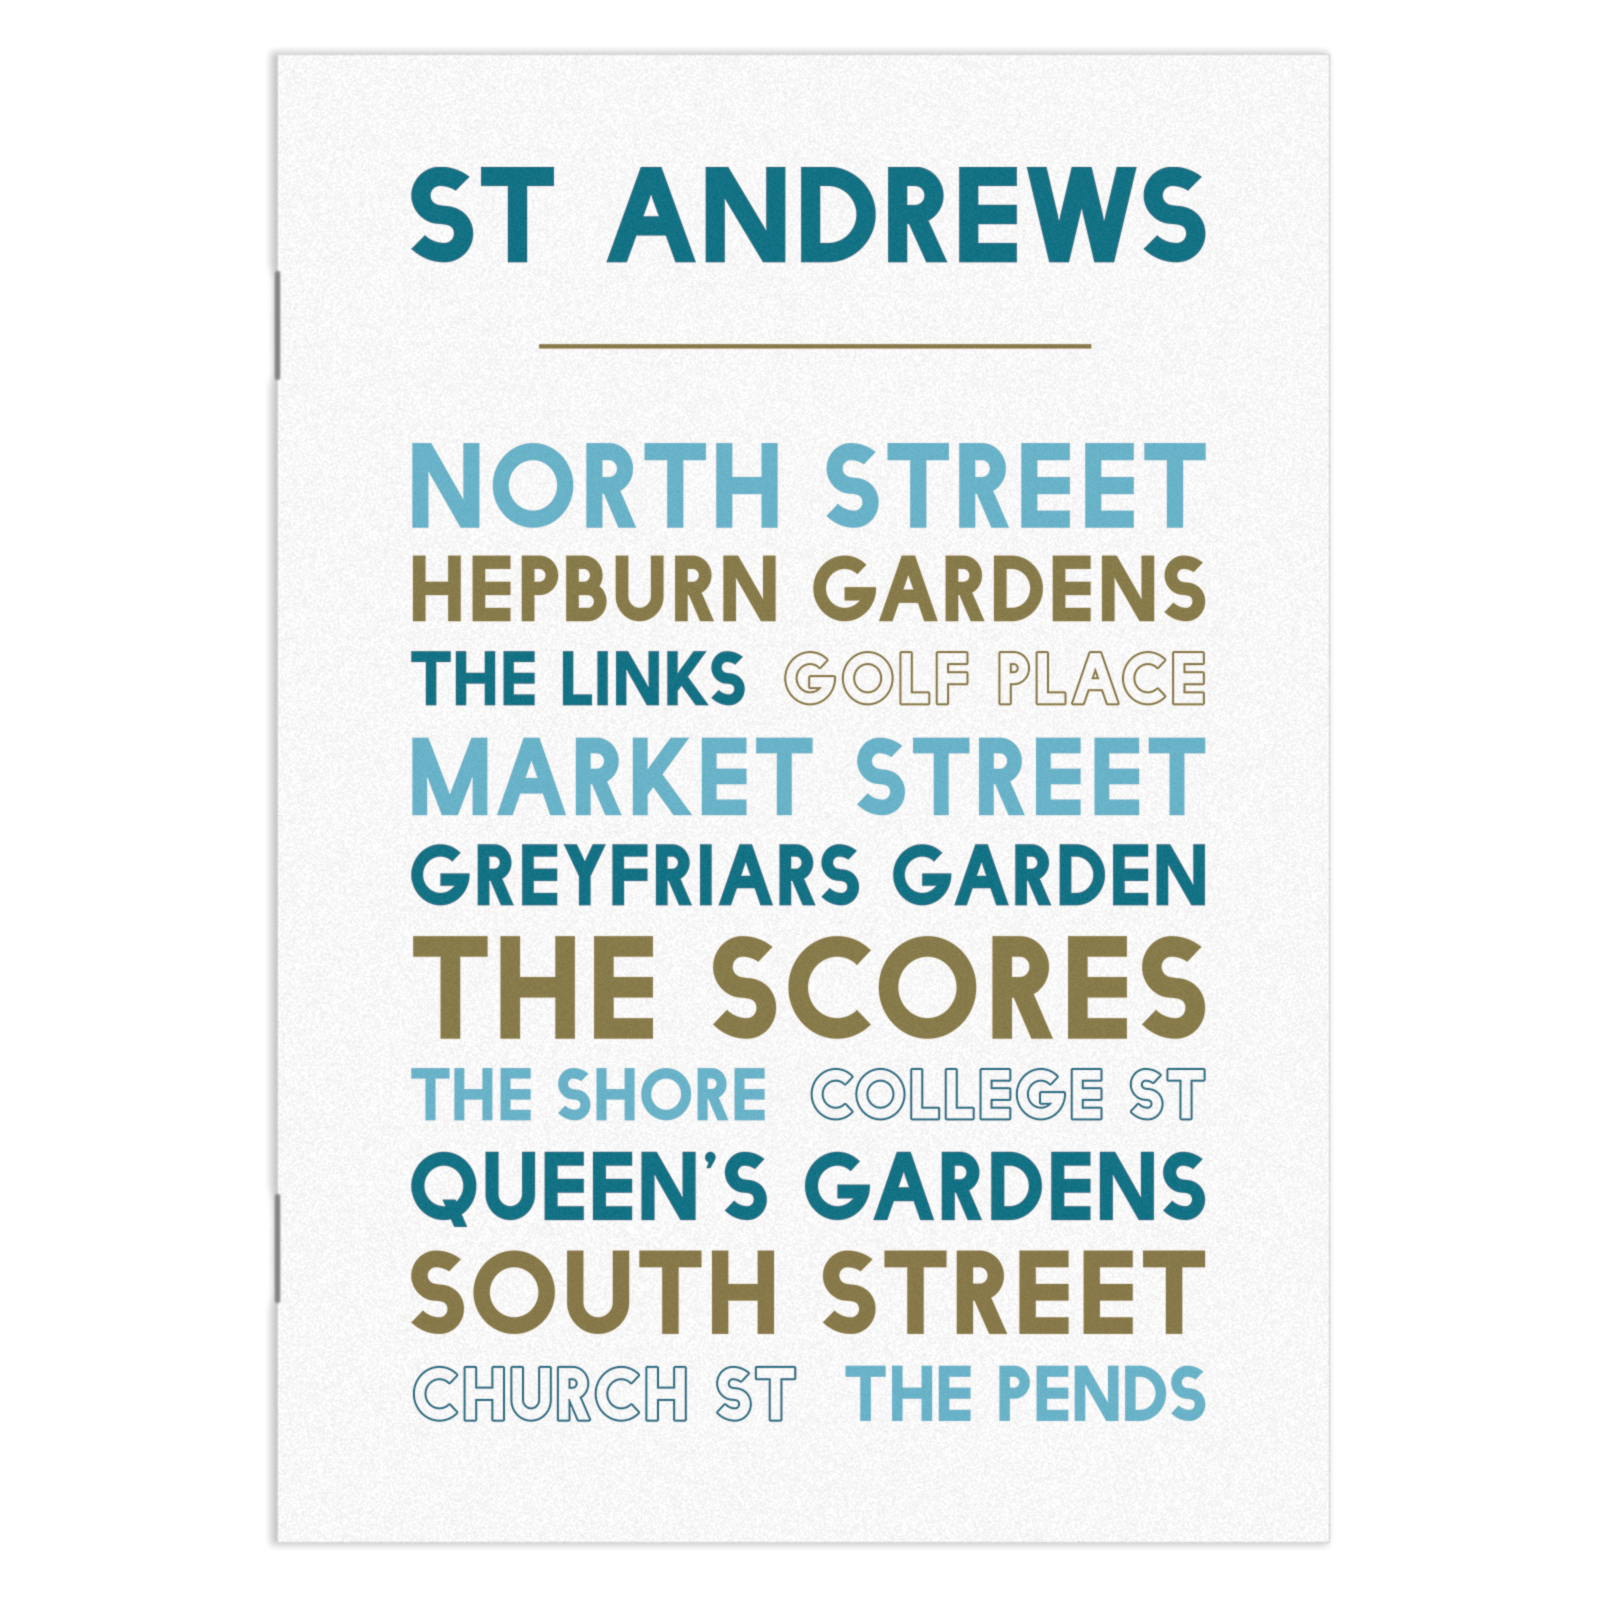 St Andrews notebook